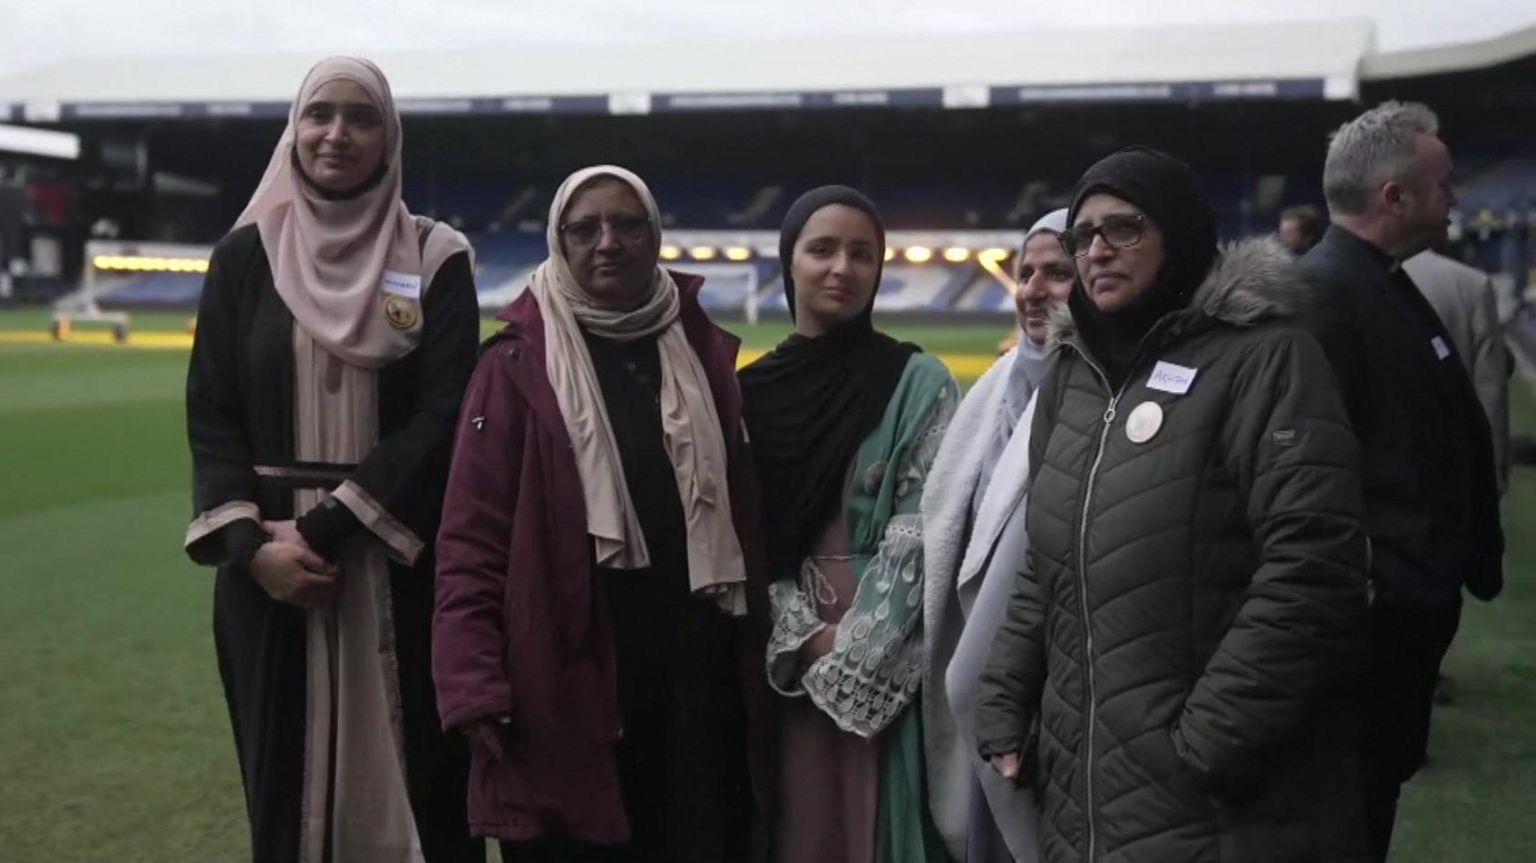 A group of women attending the Iftar event at Kenilworth Road